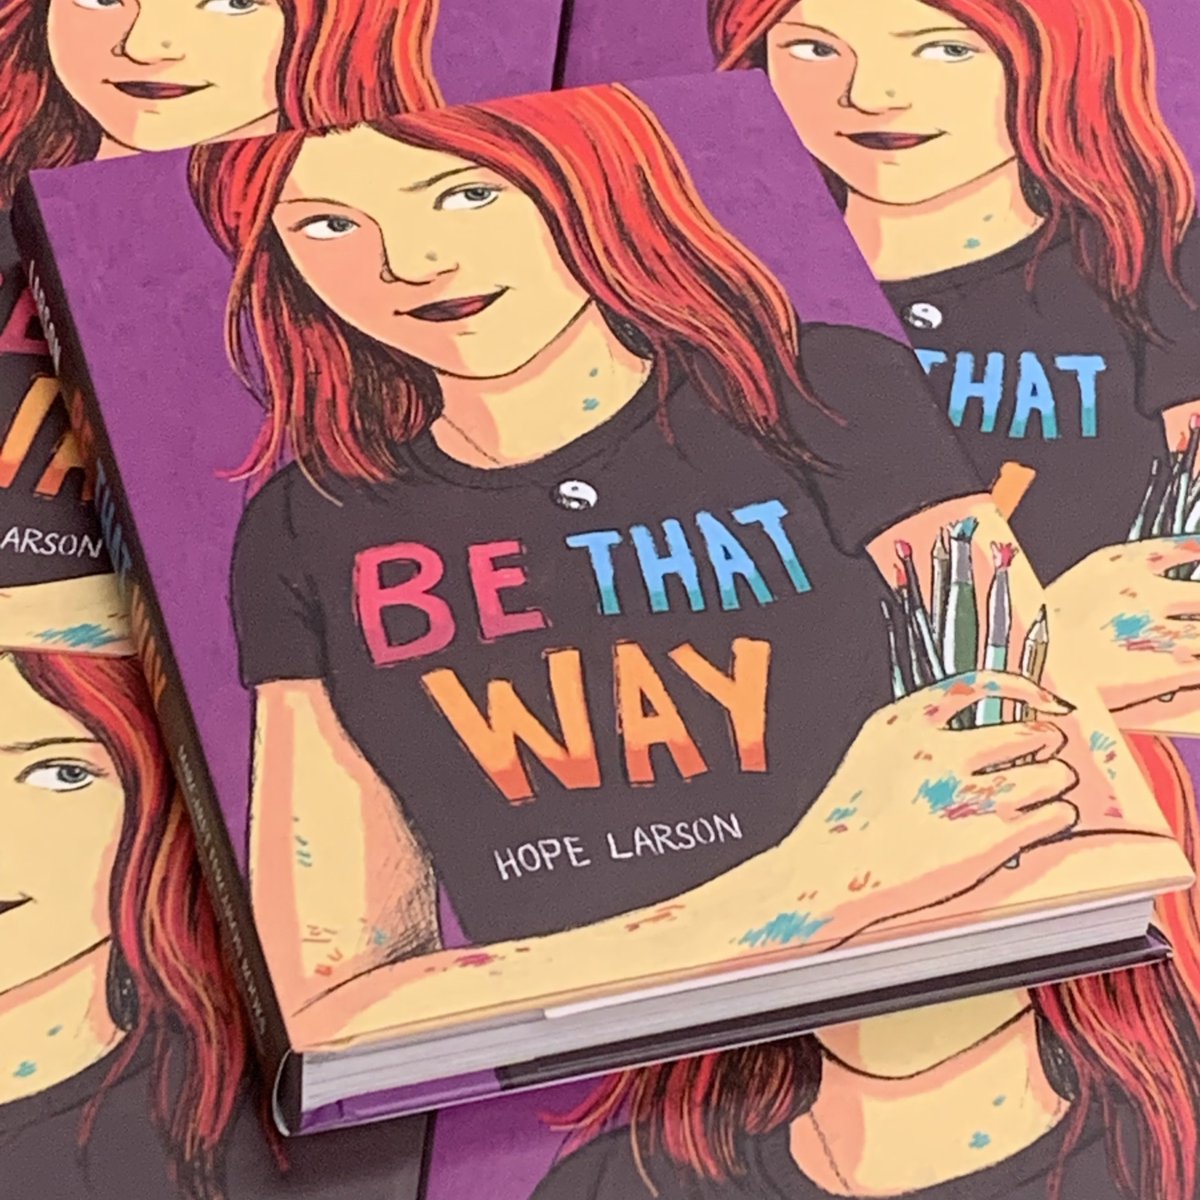 Eisner-award winner @hopelarson returns with BE THAT WAY, a #yalit ode to coming of age in the 90's. Out in October! ow.ly/okc850PxMl0